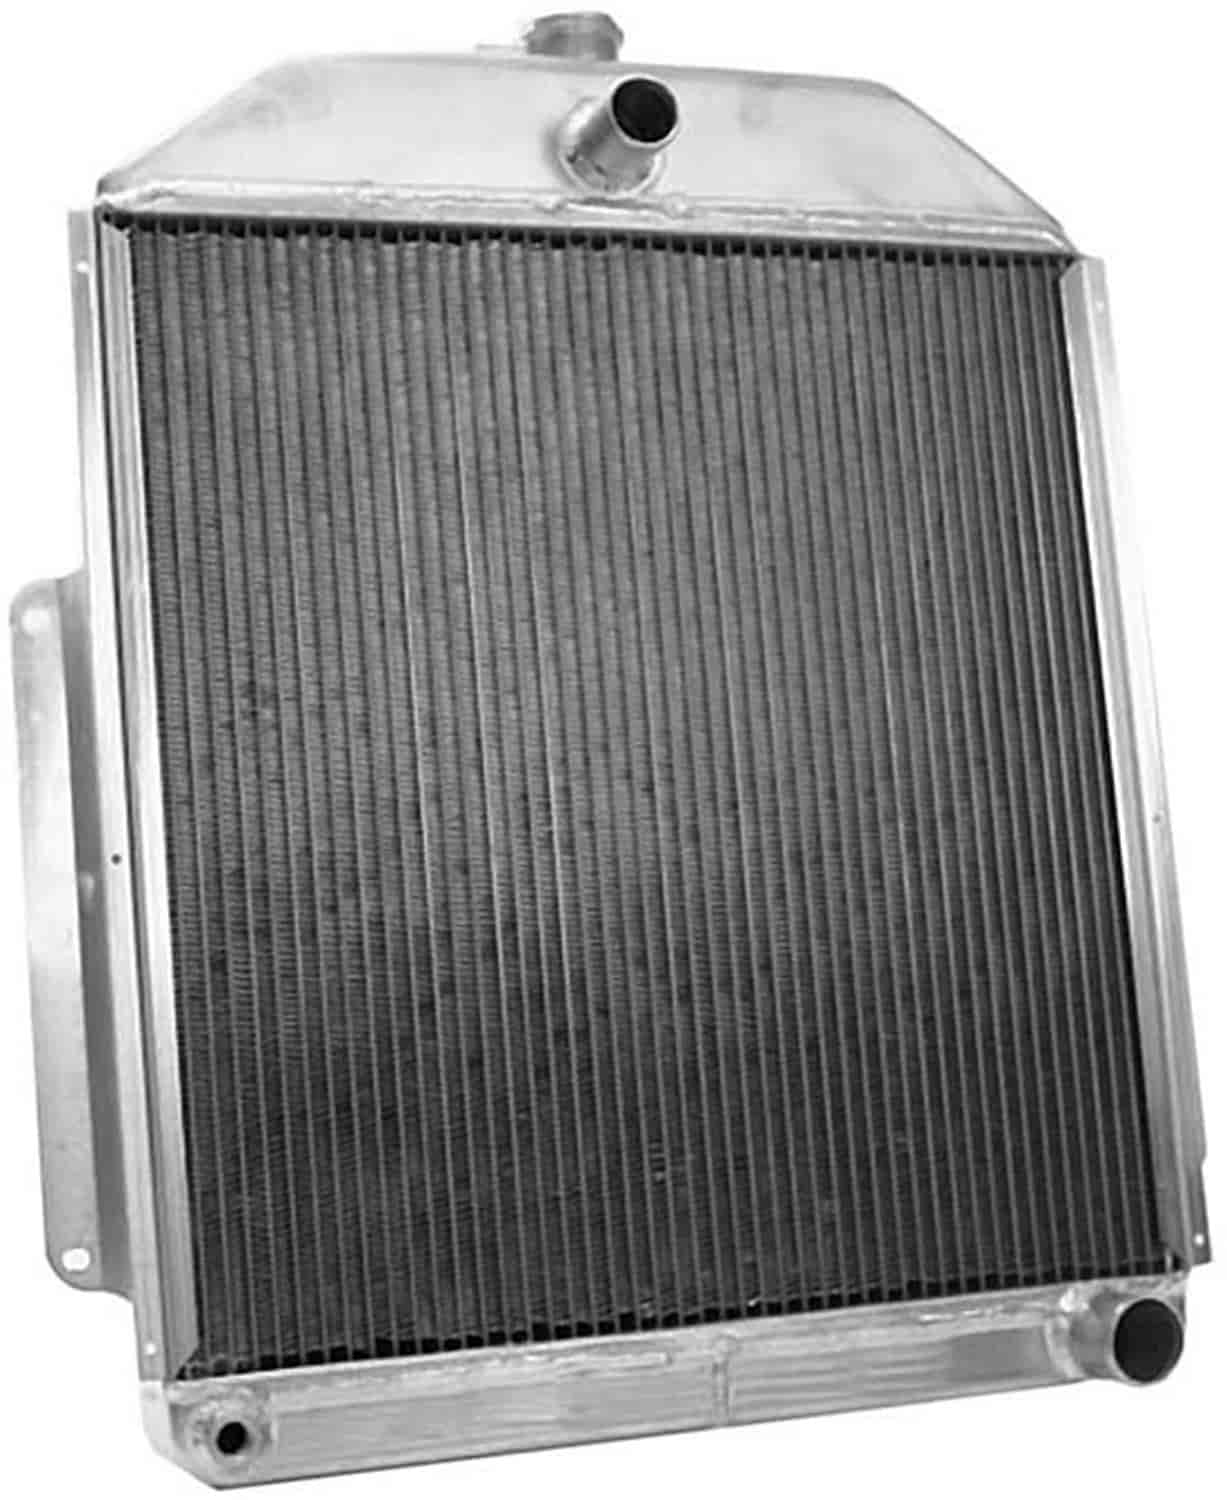 ExactFit Radiator for 1942-1952 Ford Truck with Early